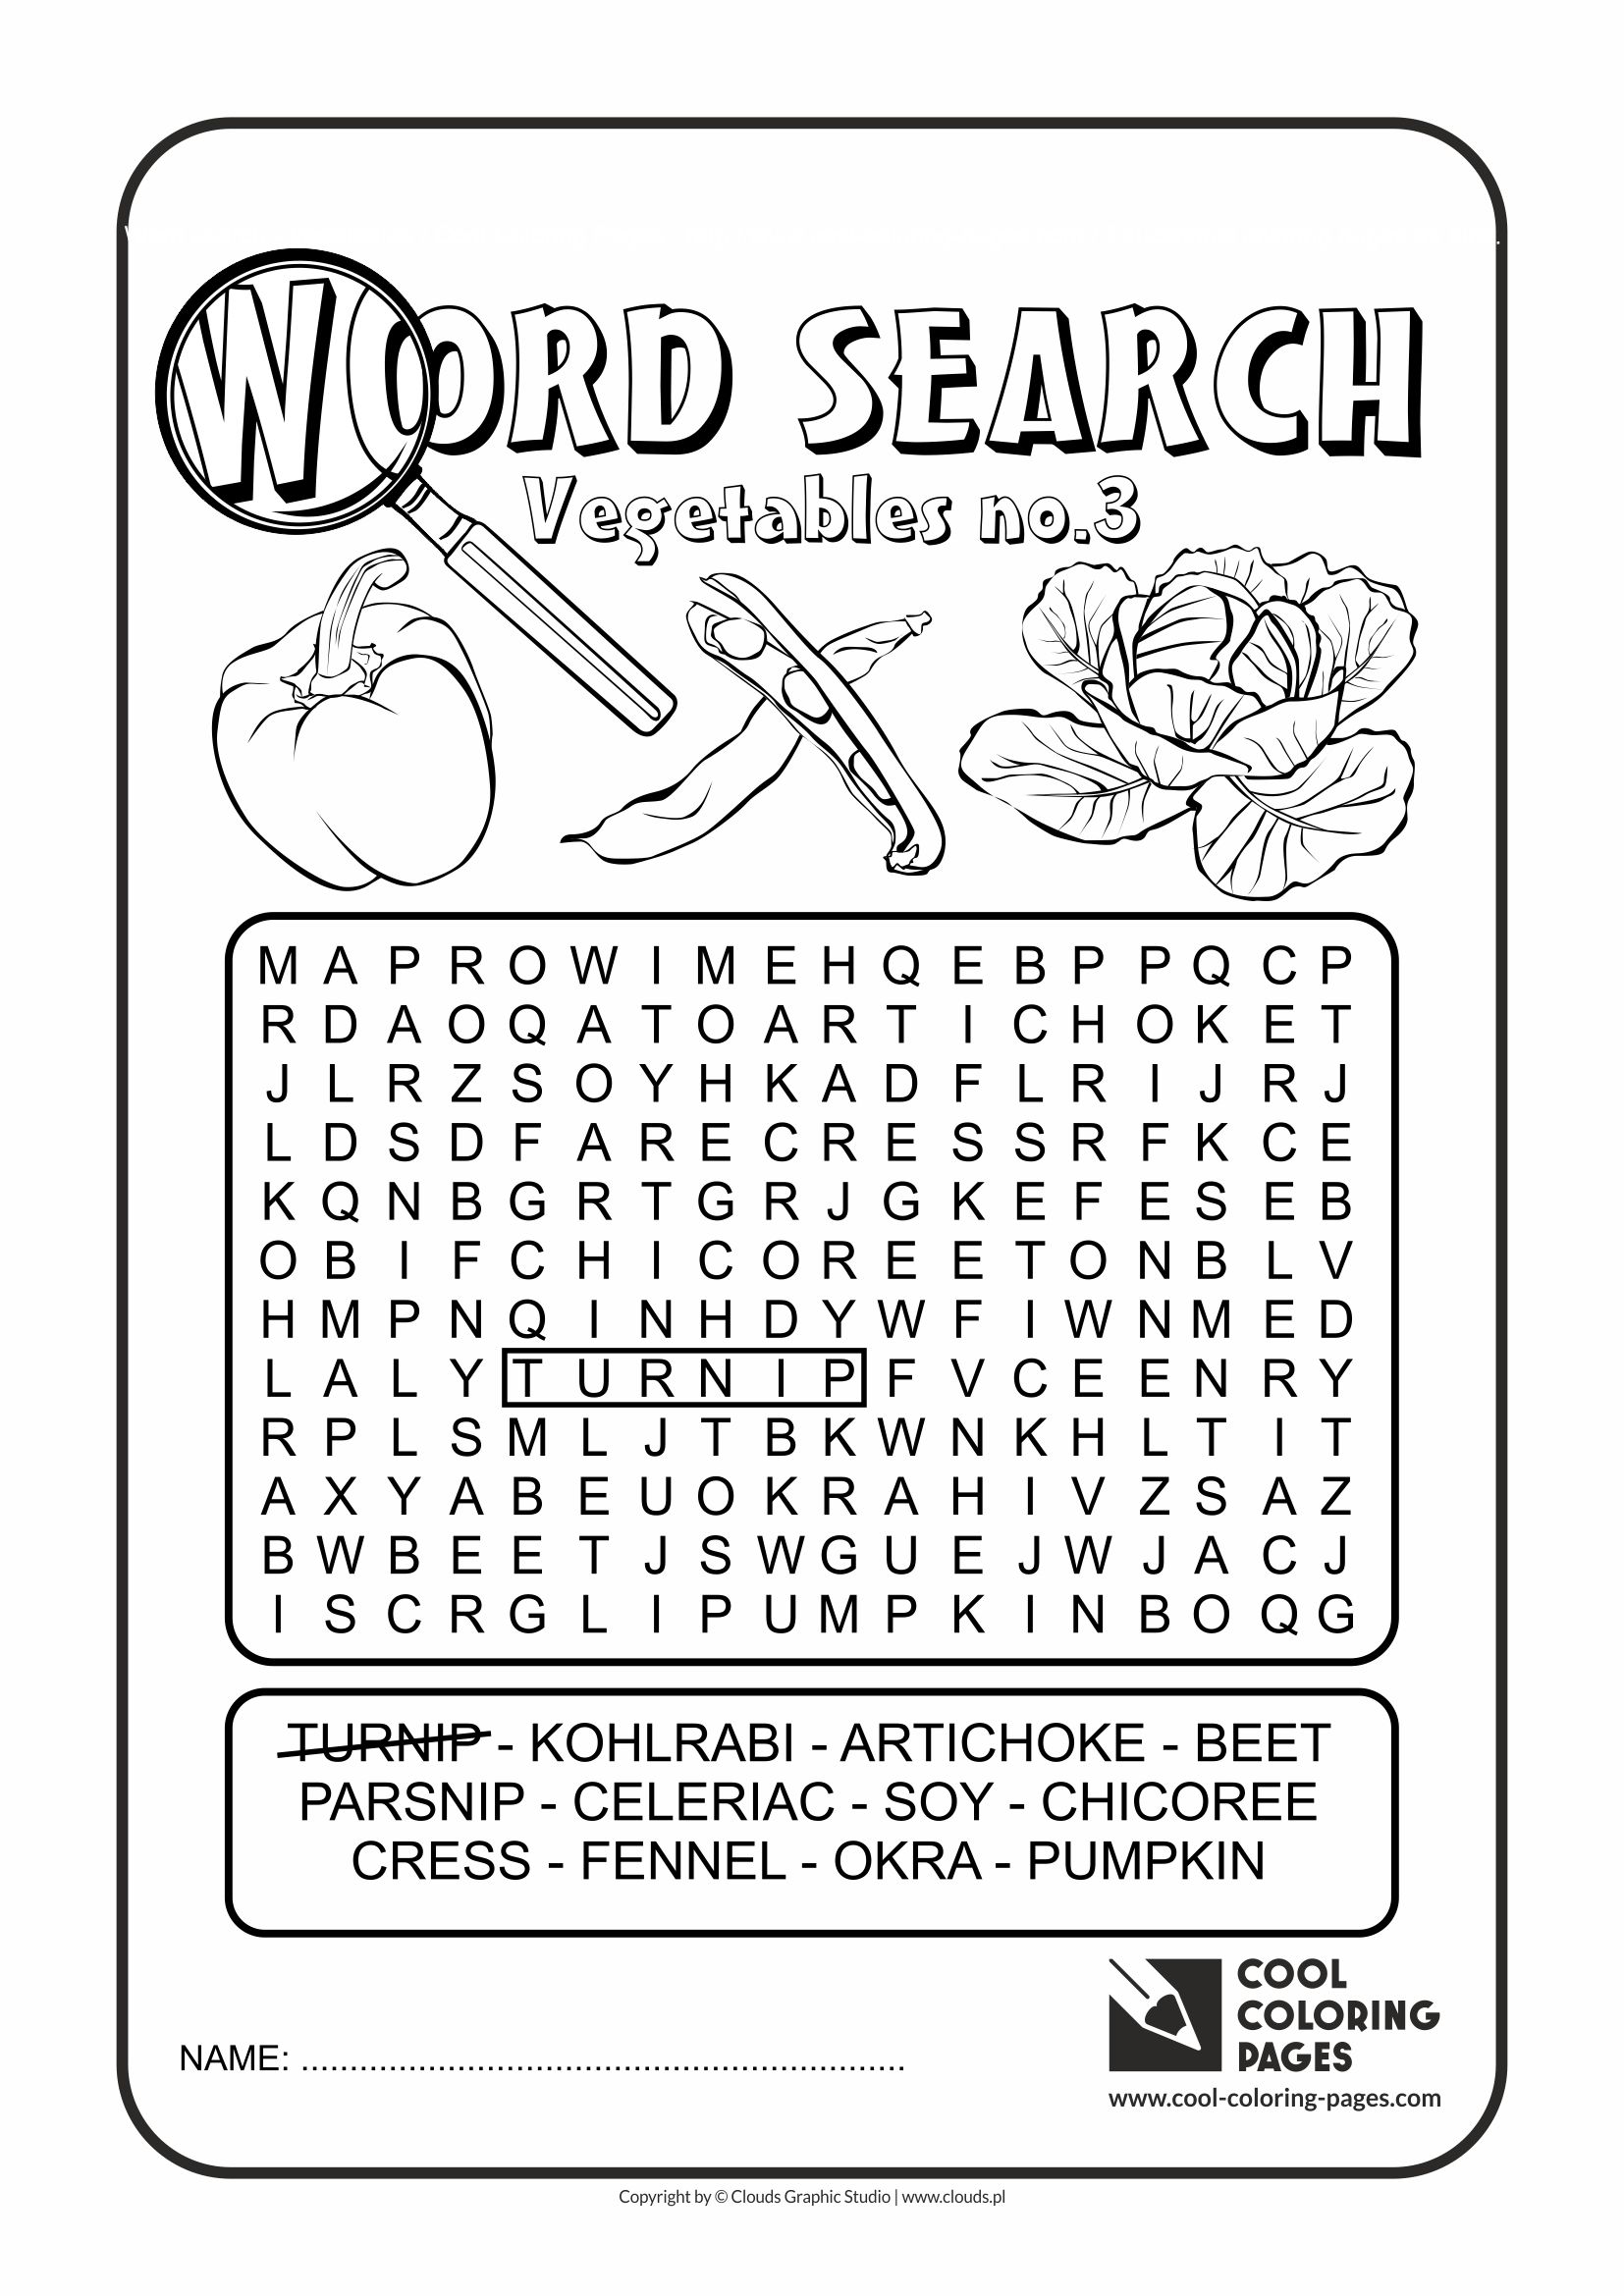 Cool Coloring Pages - Word search / Word search vegetables no 3 / Coloring page with word search vegetables no 3